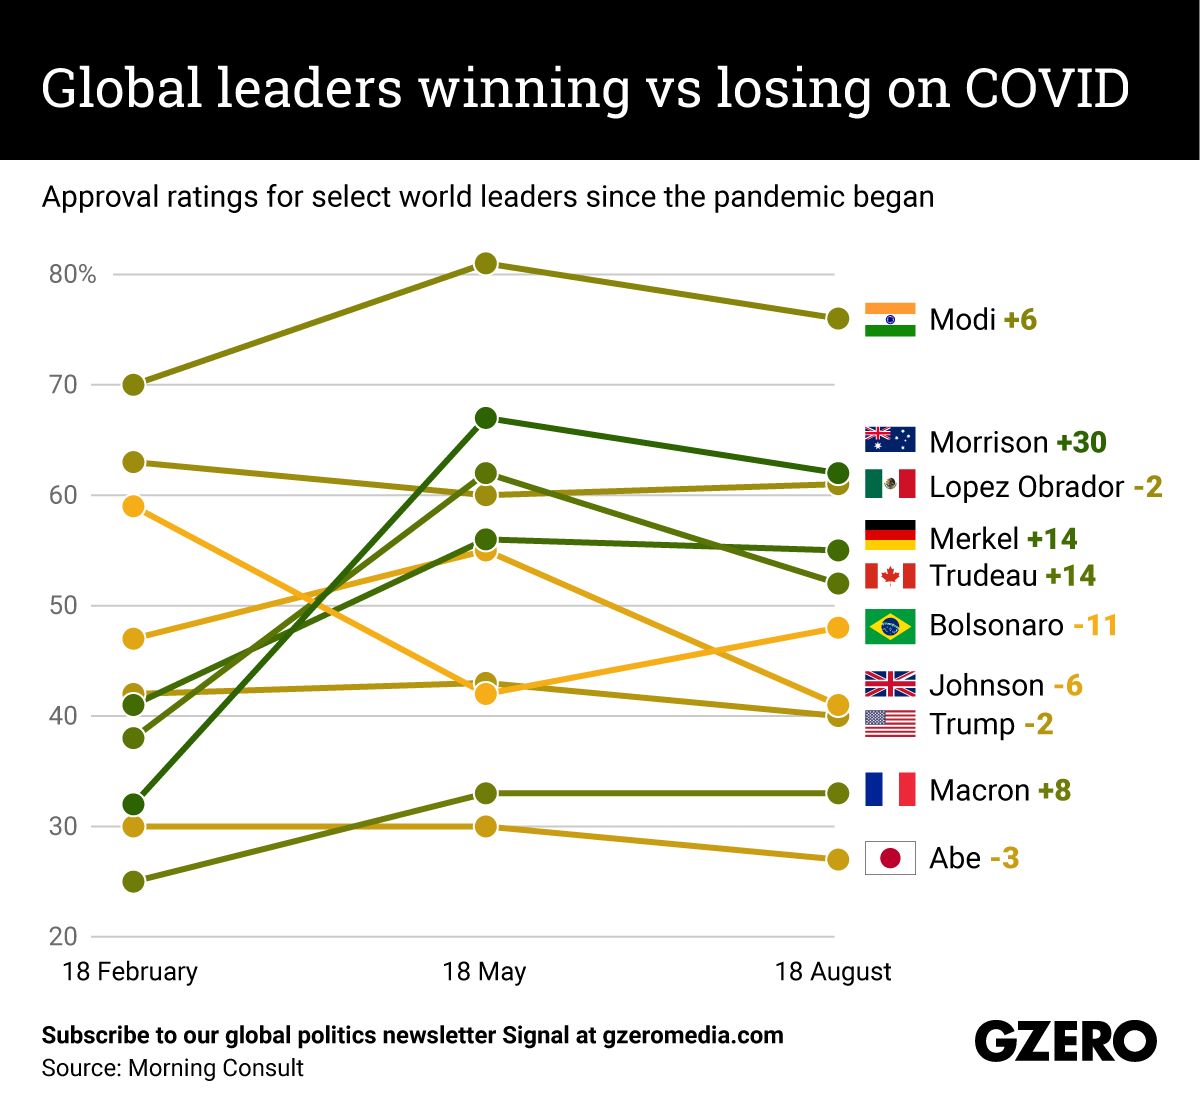 The Graphic Truth: Global leaders winning vs losing on COVID